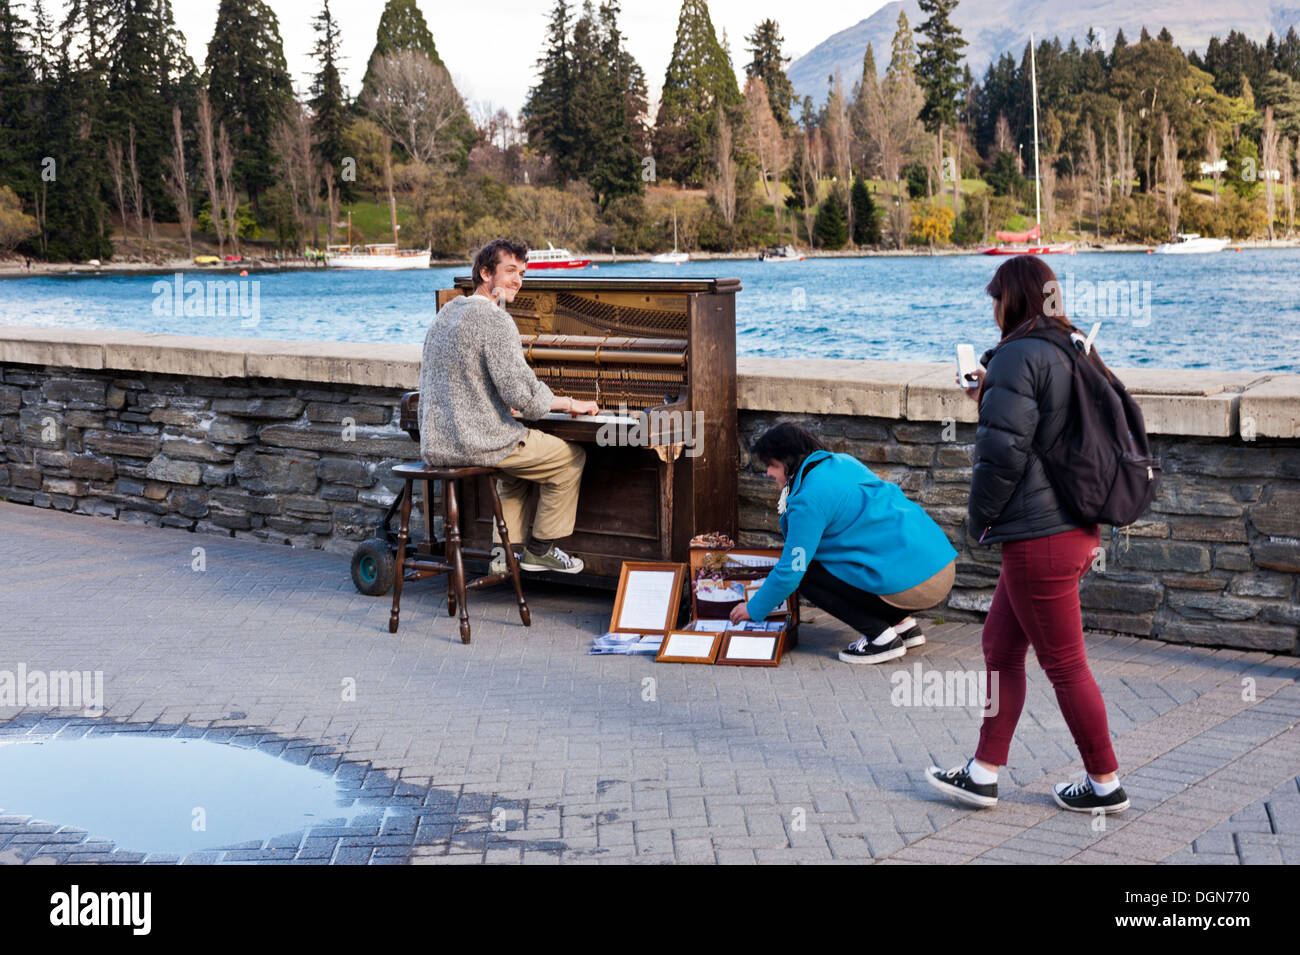 Busker with piano on the lake shore, Lake Wakatipu, Queenstown, New Zealand. Stock Photo